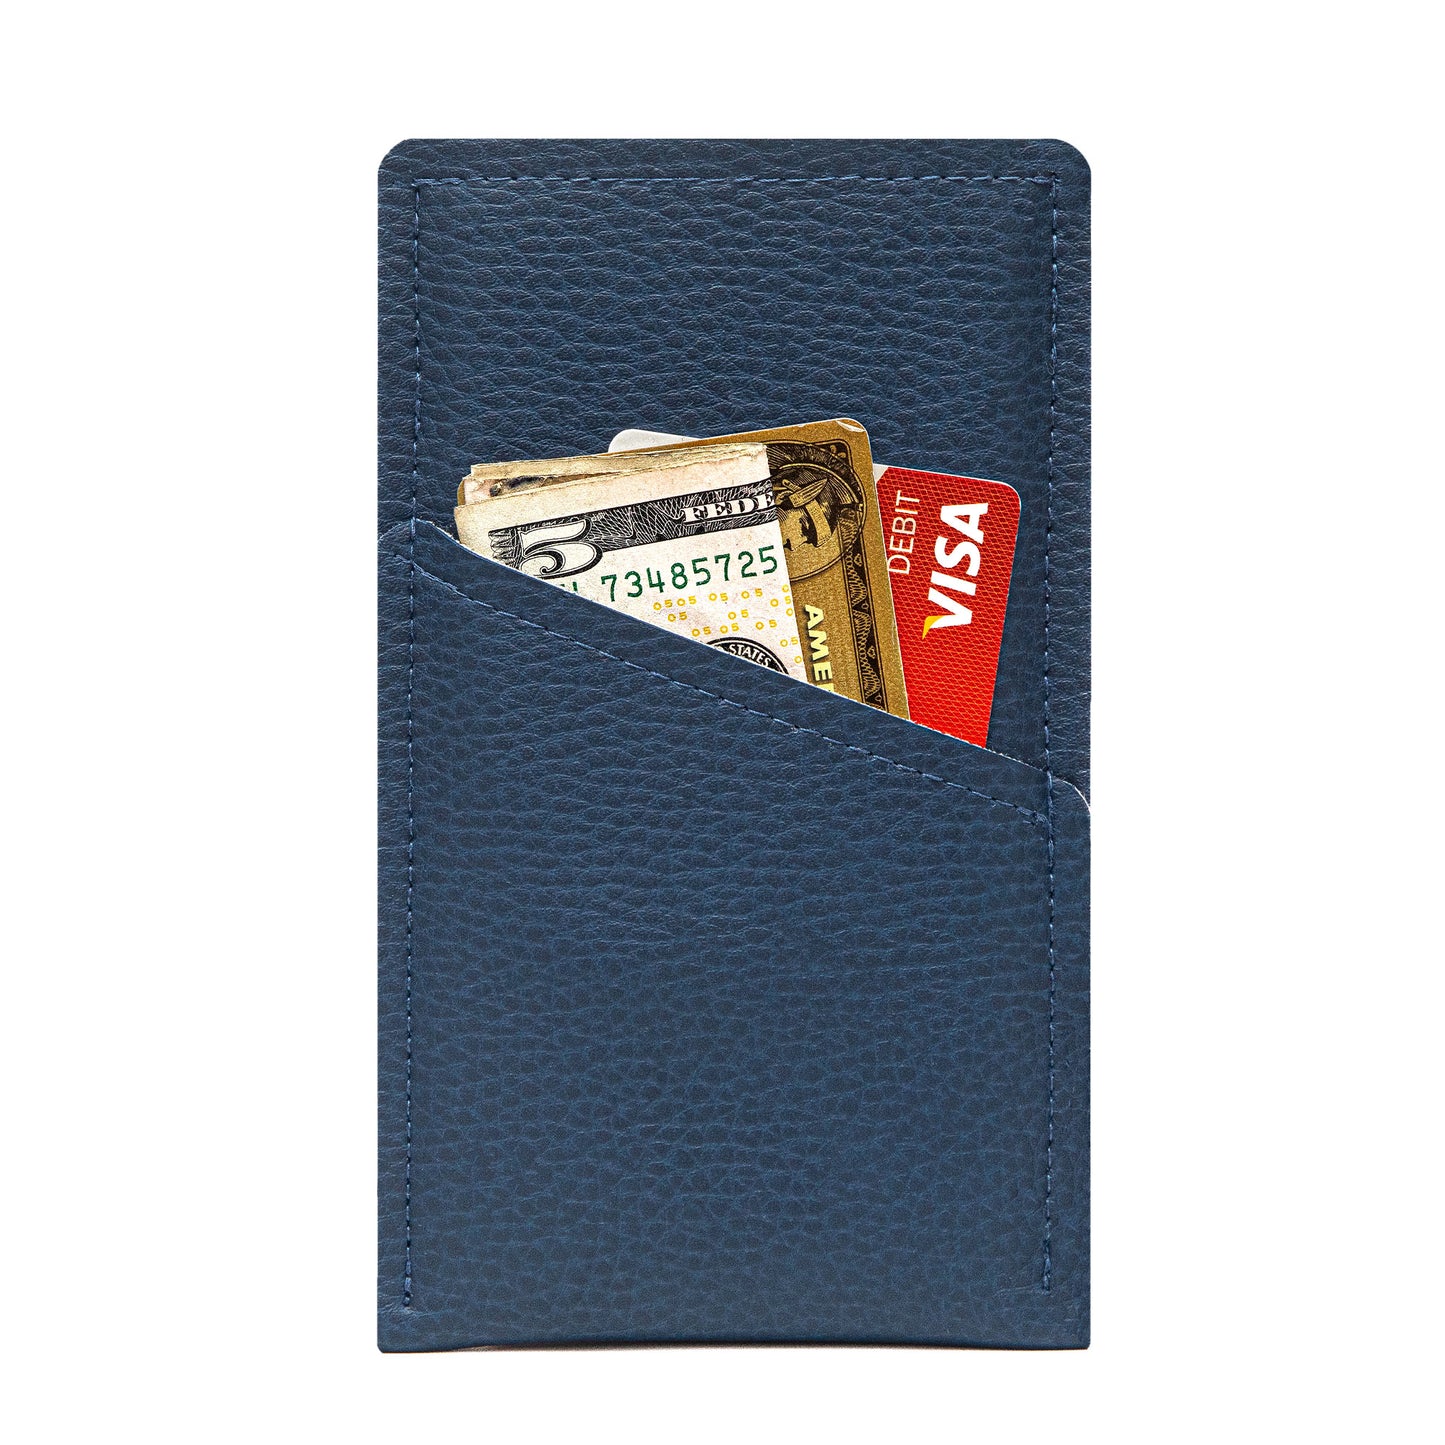 Modern Faux Leather iPhone Sleeve with Card Pocket – Navy Blue